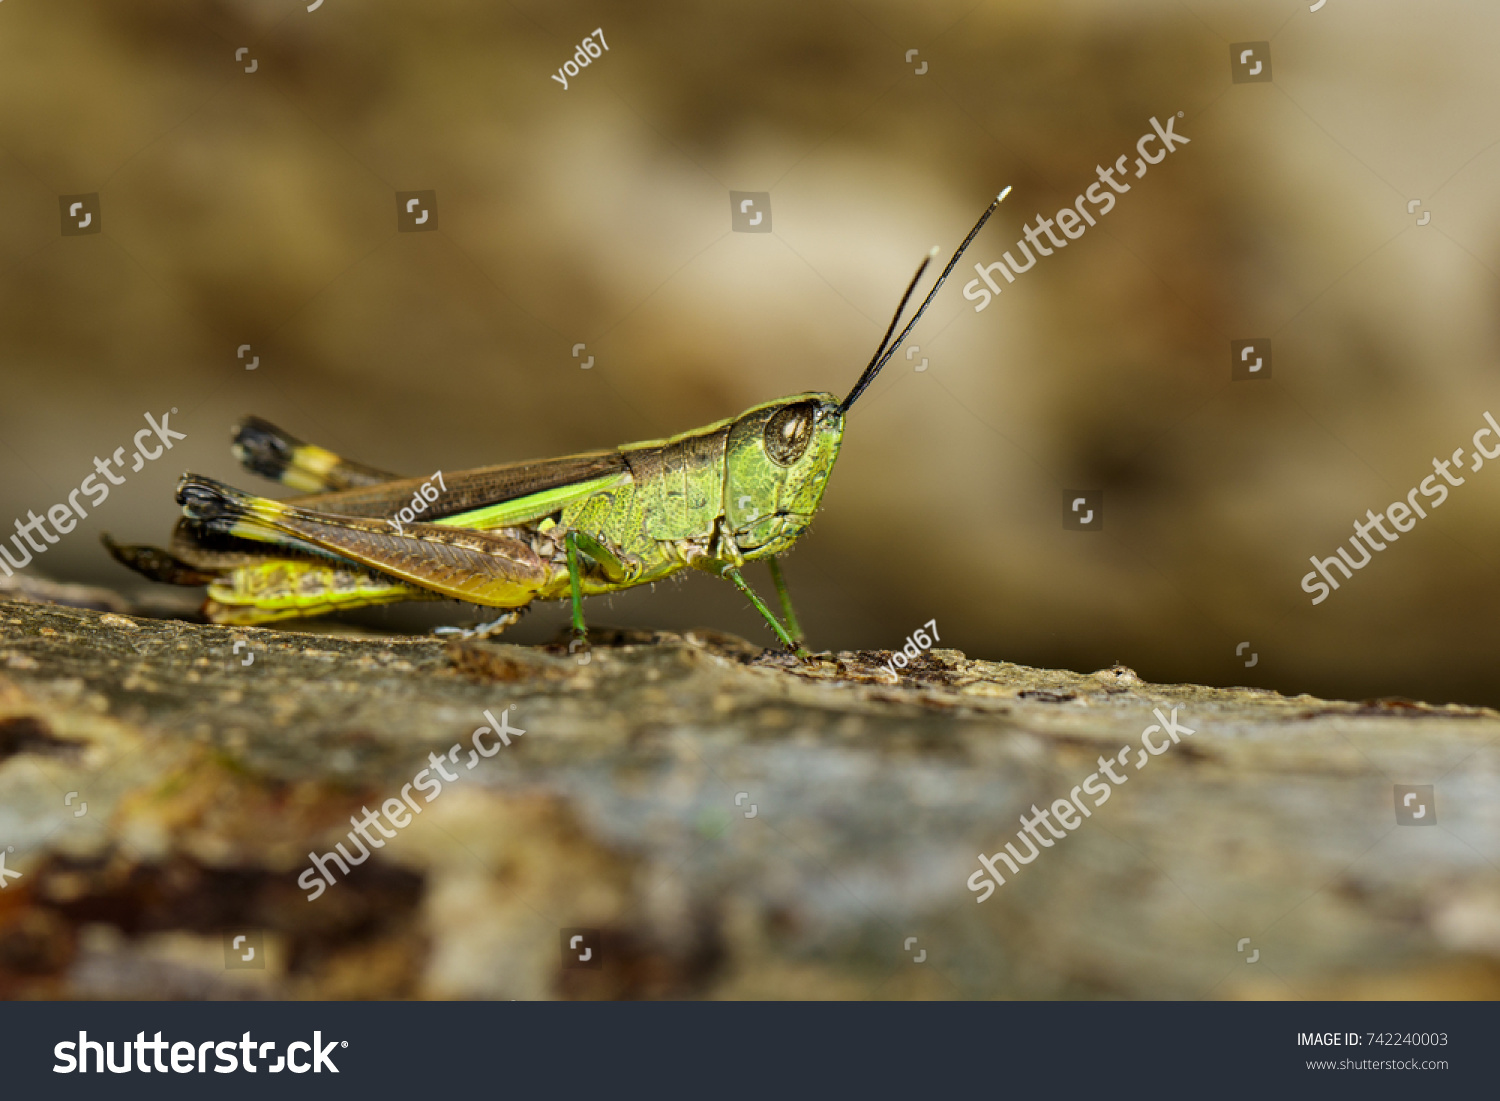 Image of sugarcane white-tipped locust (Ceracris fasciata) on the natural background. Insect. Animal. Caelifera., Acrididae #742240003